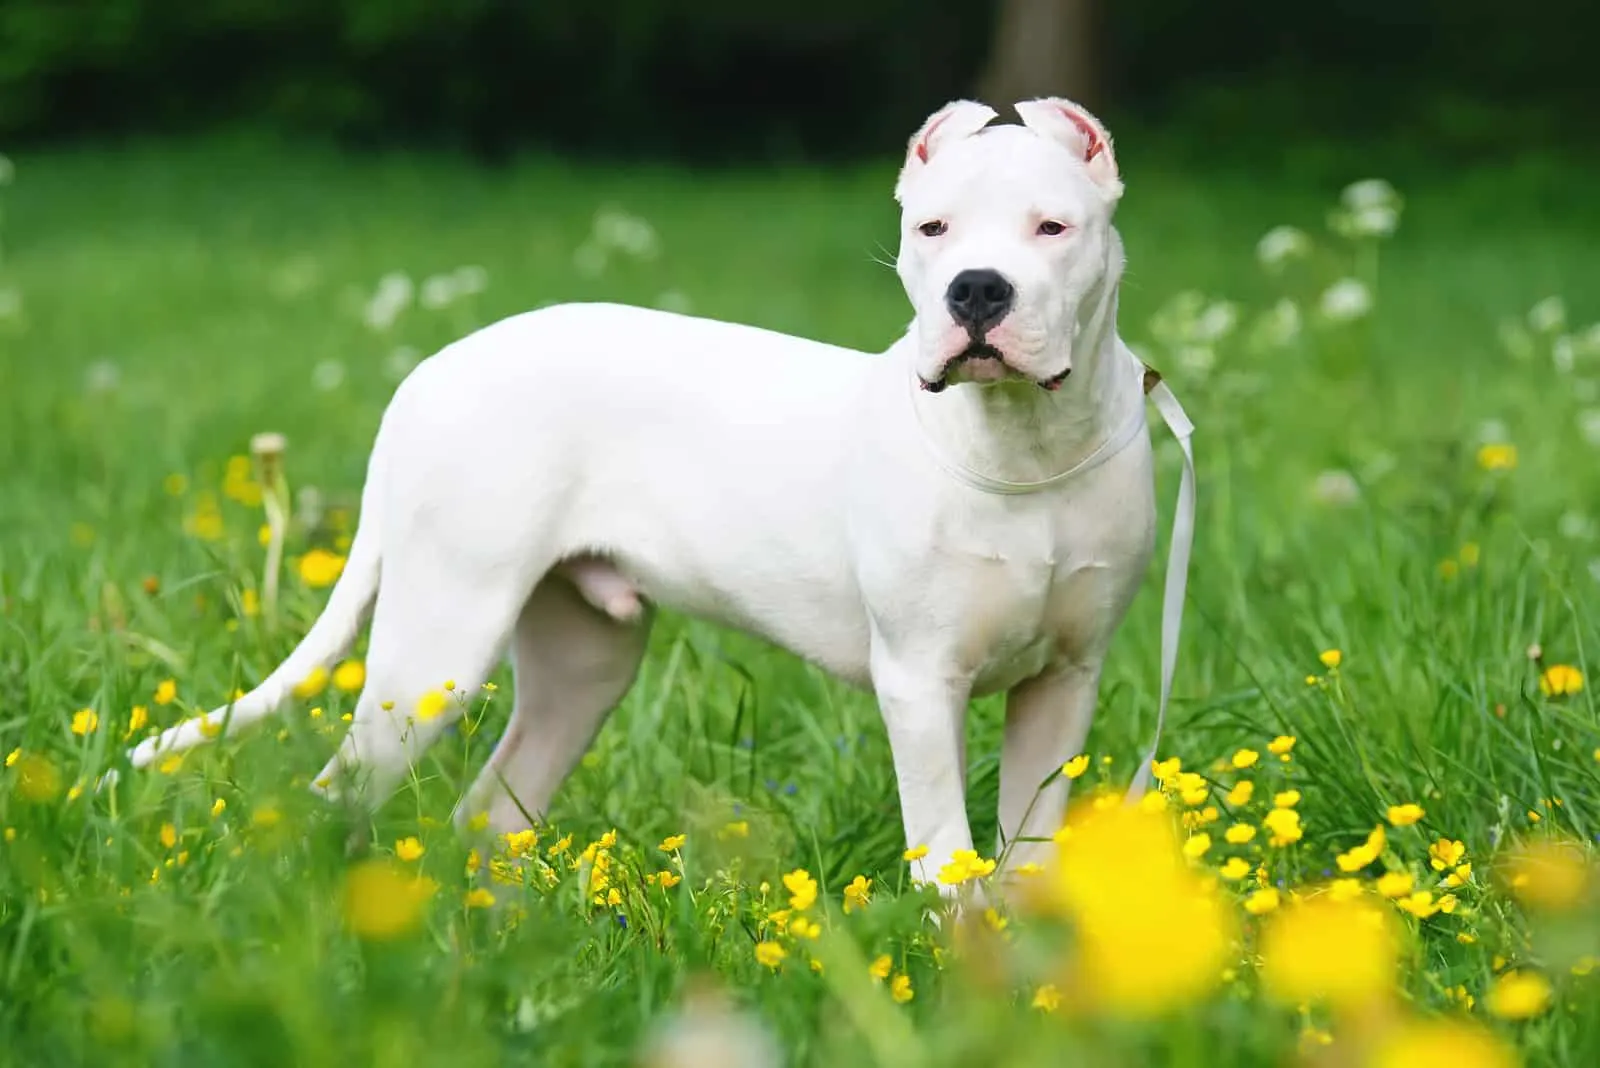 Dogo Argentino dog with cropped ears staying outdoors 